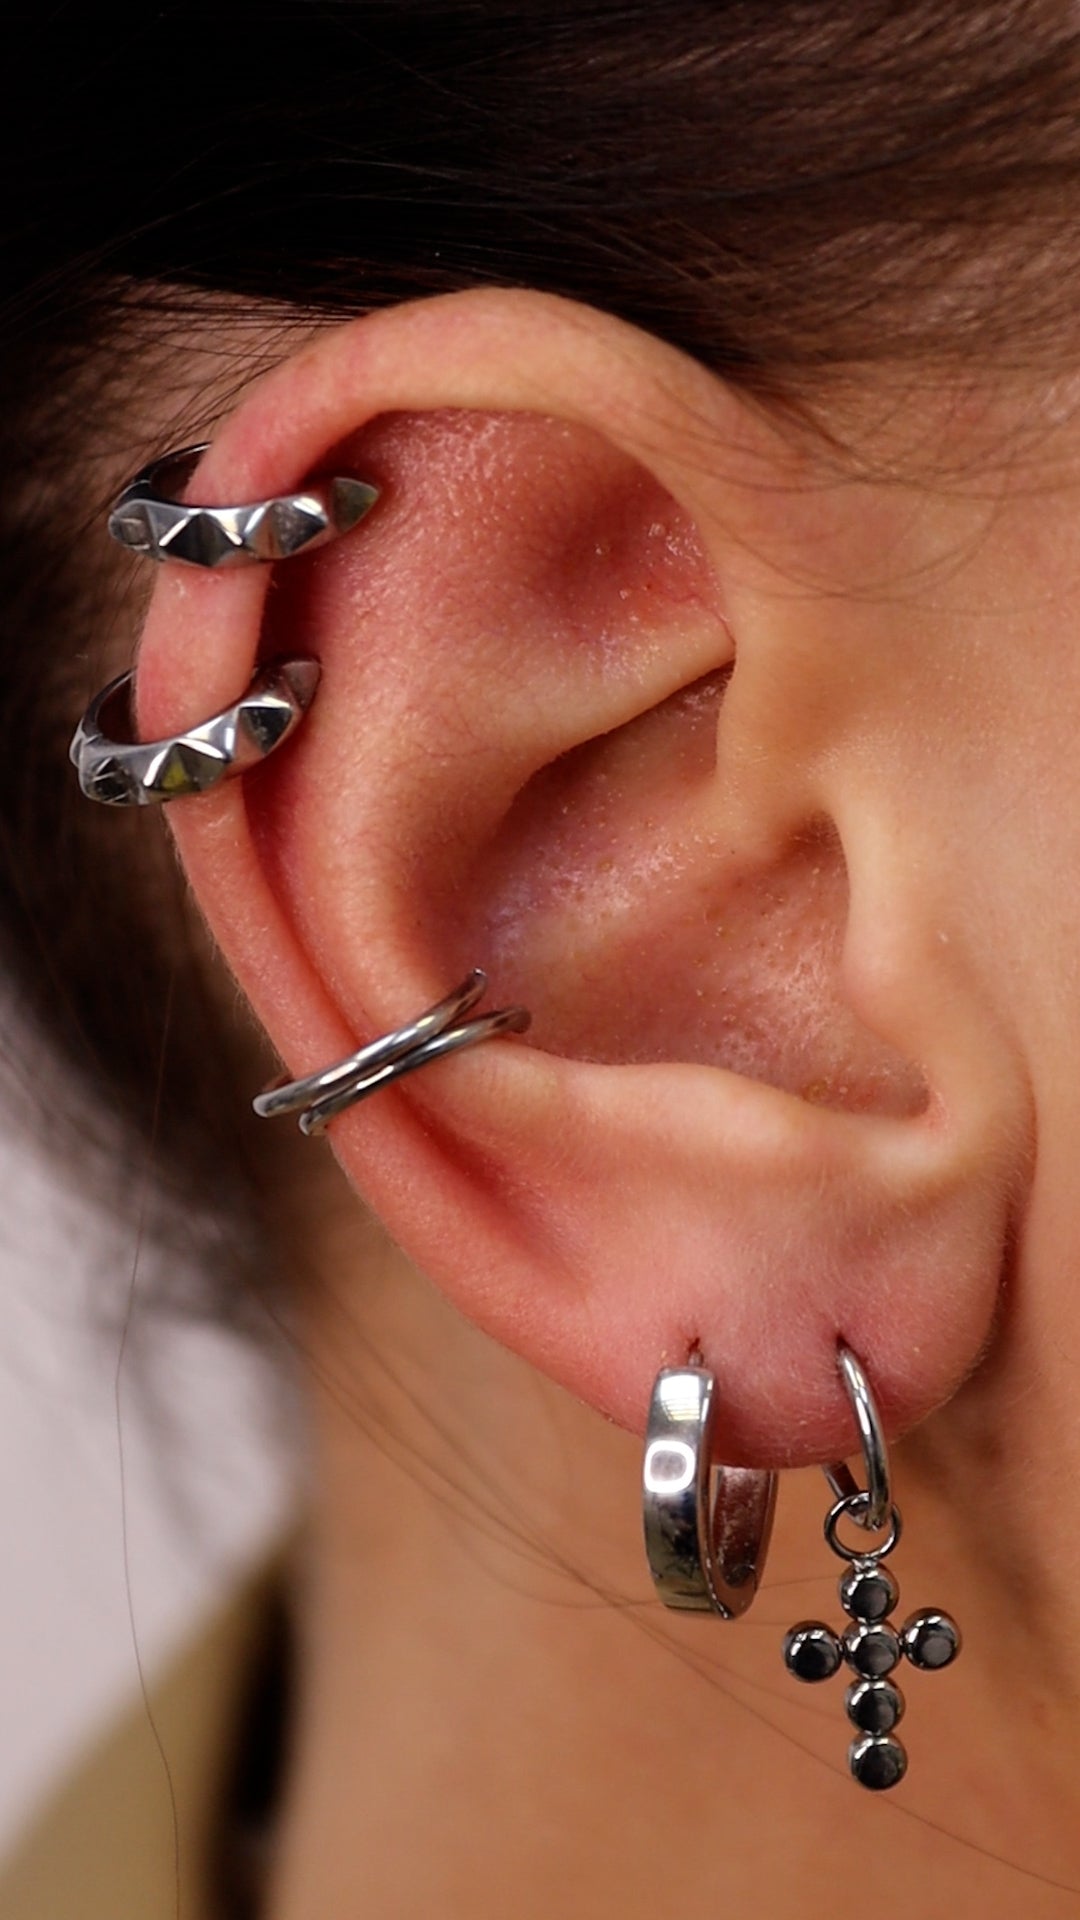 Everything You Wanted To Know About the Tragus Piercing – Pierced